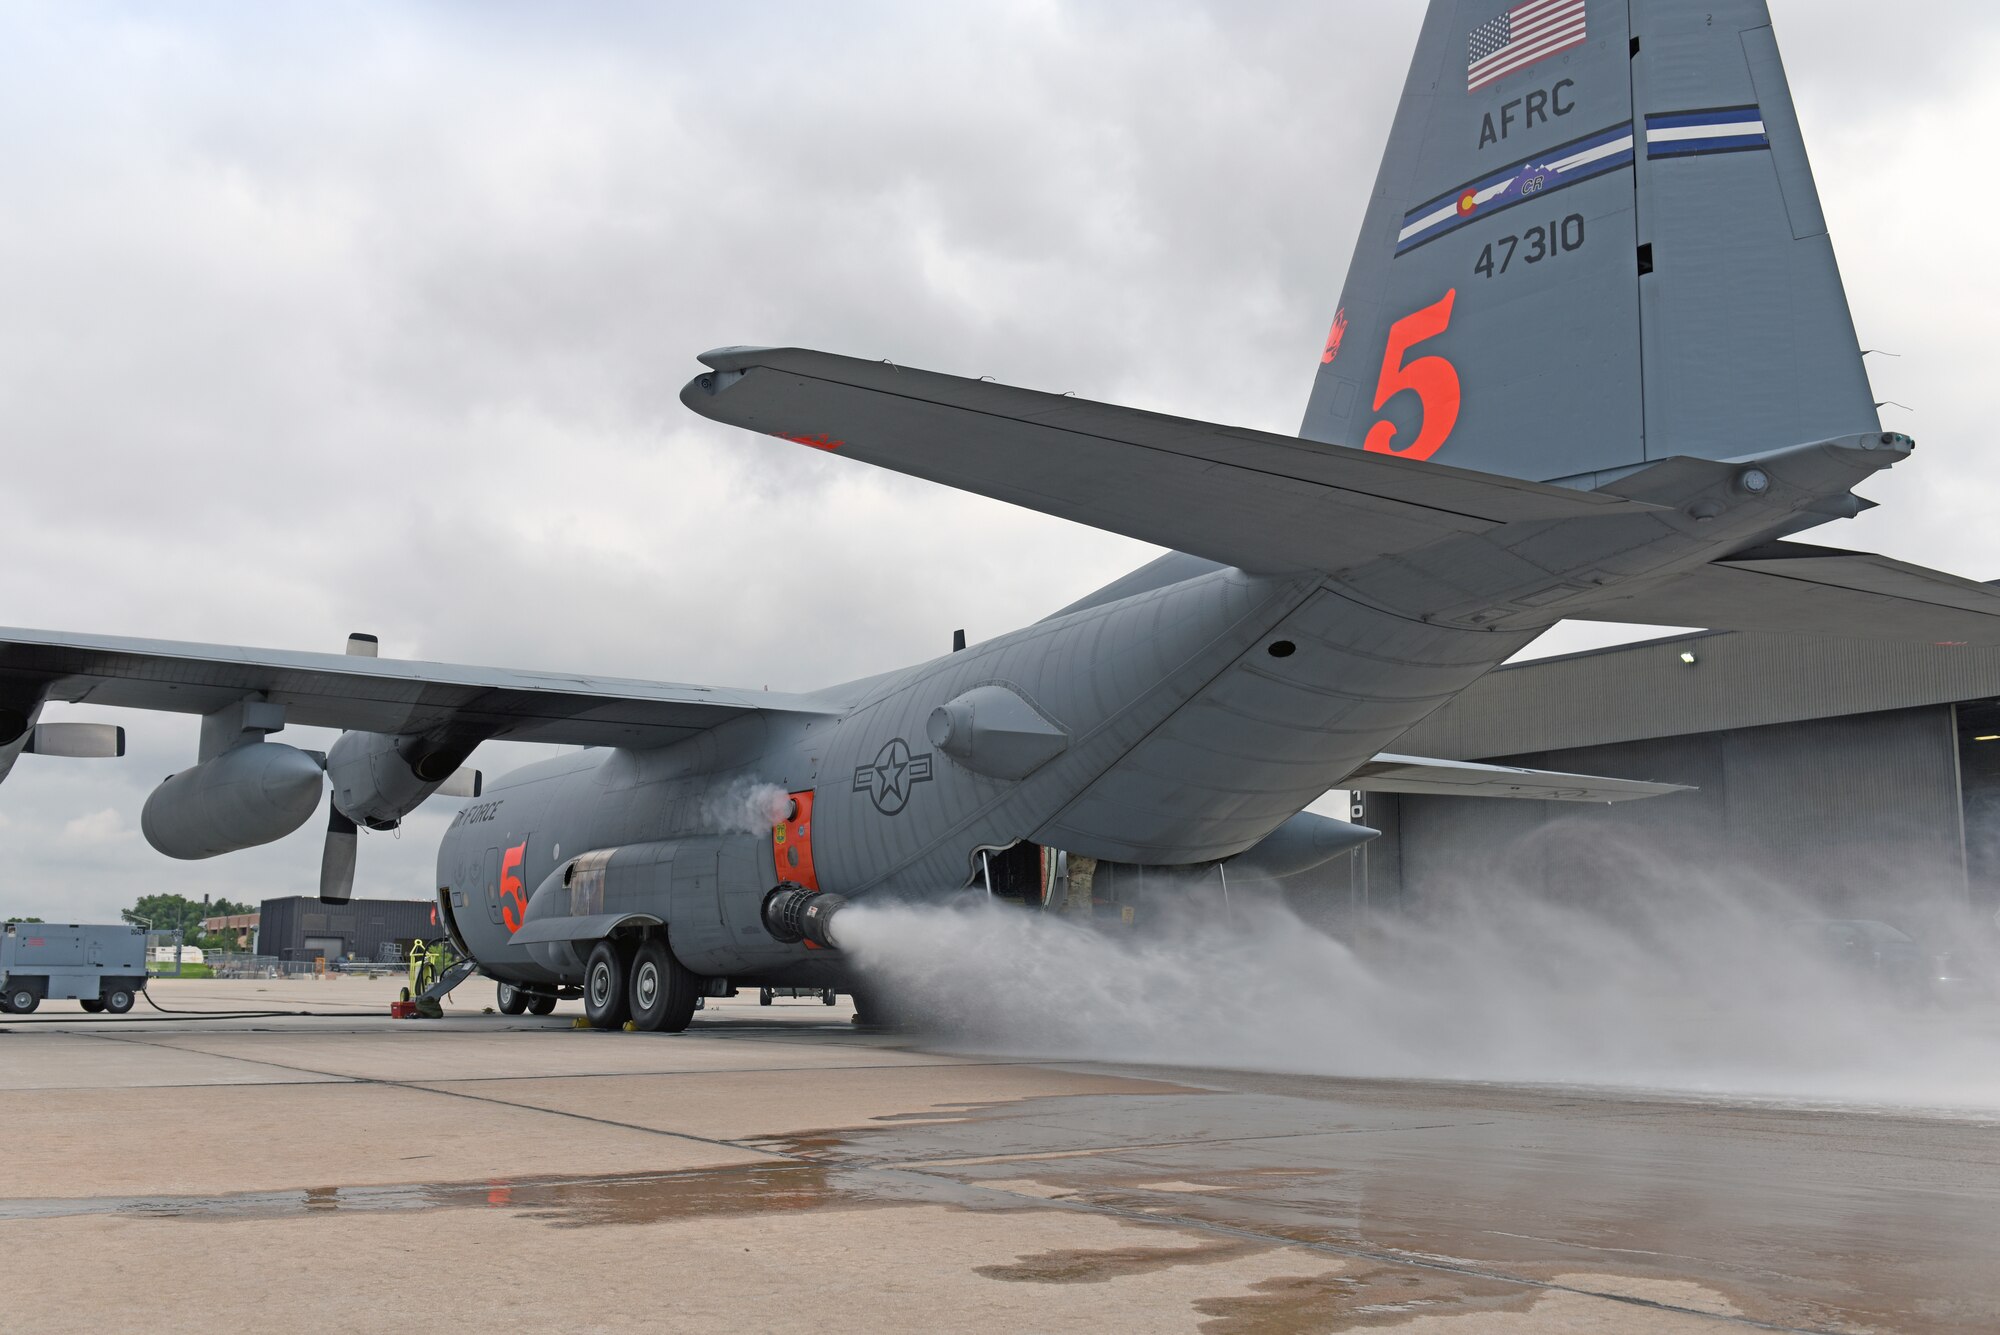 A 302nd Airlift Wing Modular Airborne Fire Fighting System equipped-C-130 Hercules aircraft performs a system test at Peterson Air Force Base, Colorado, July 22, 2019